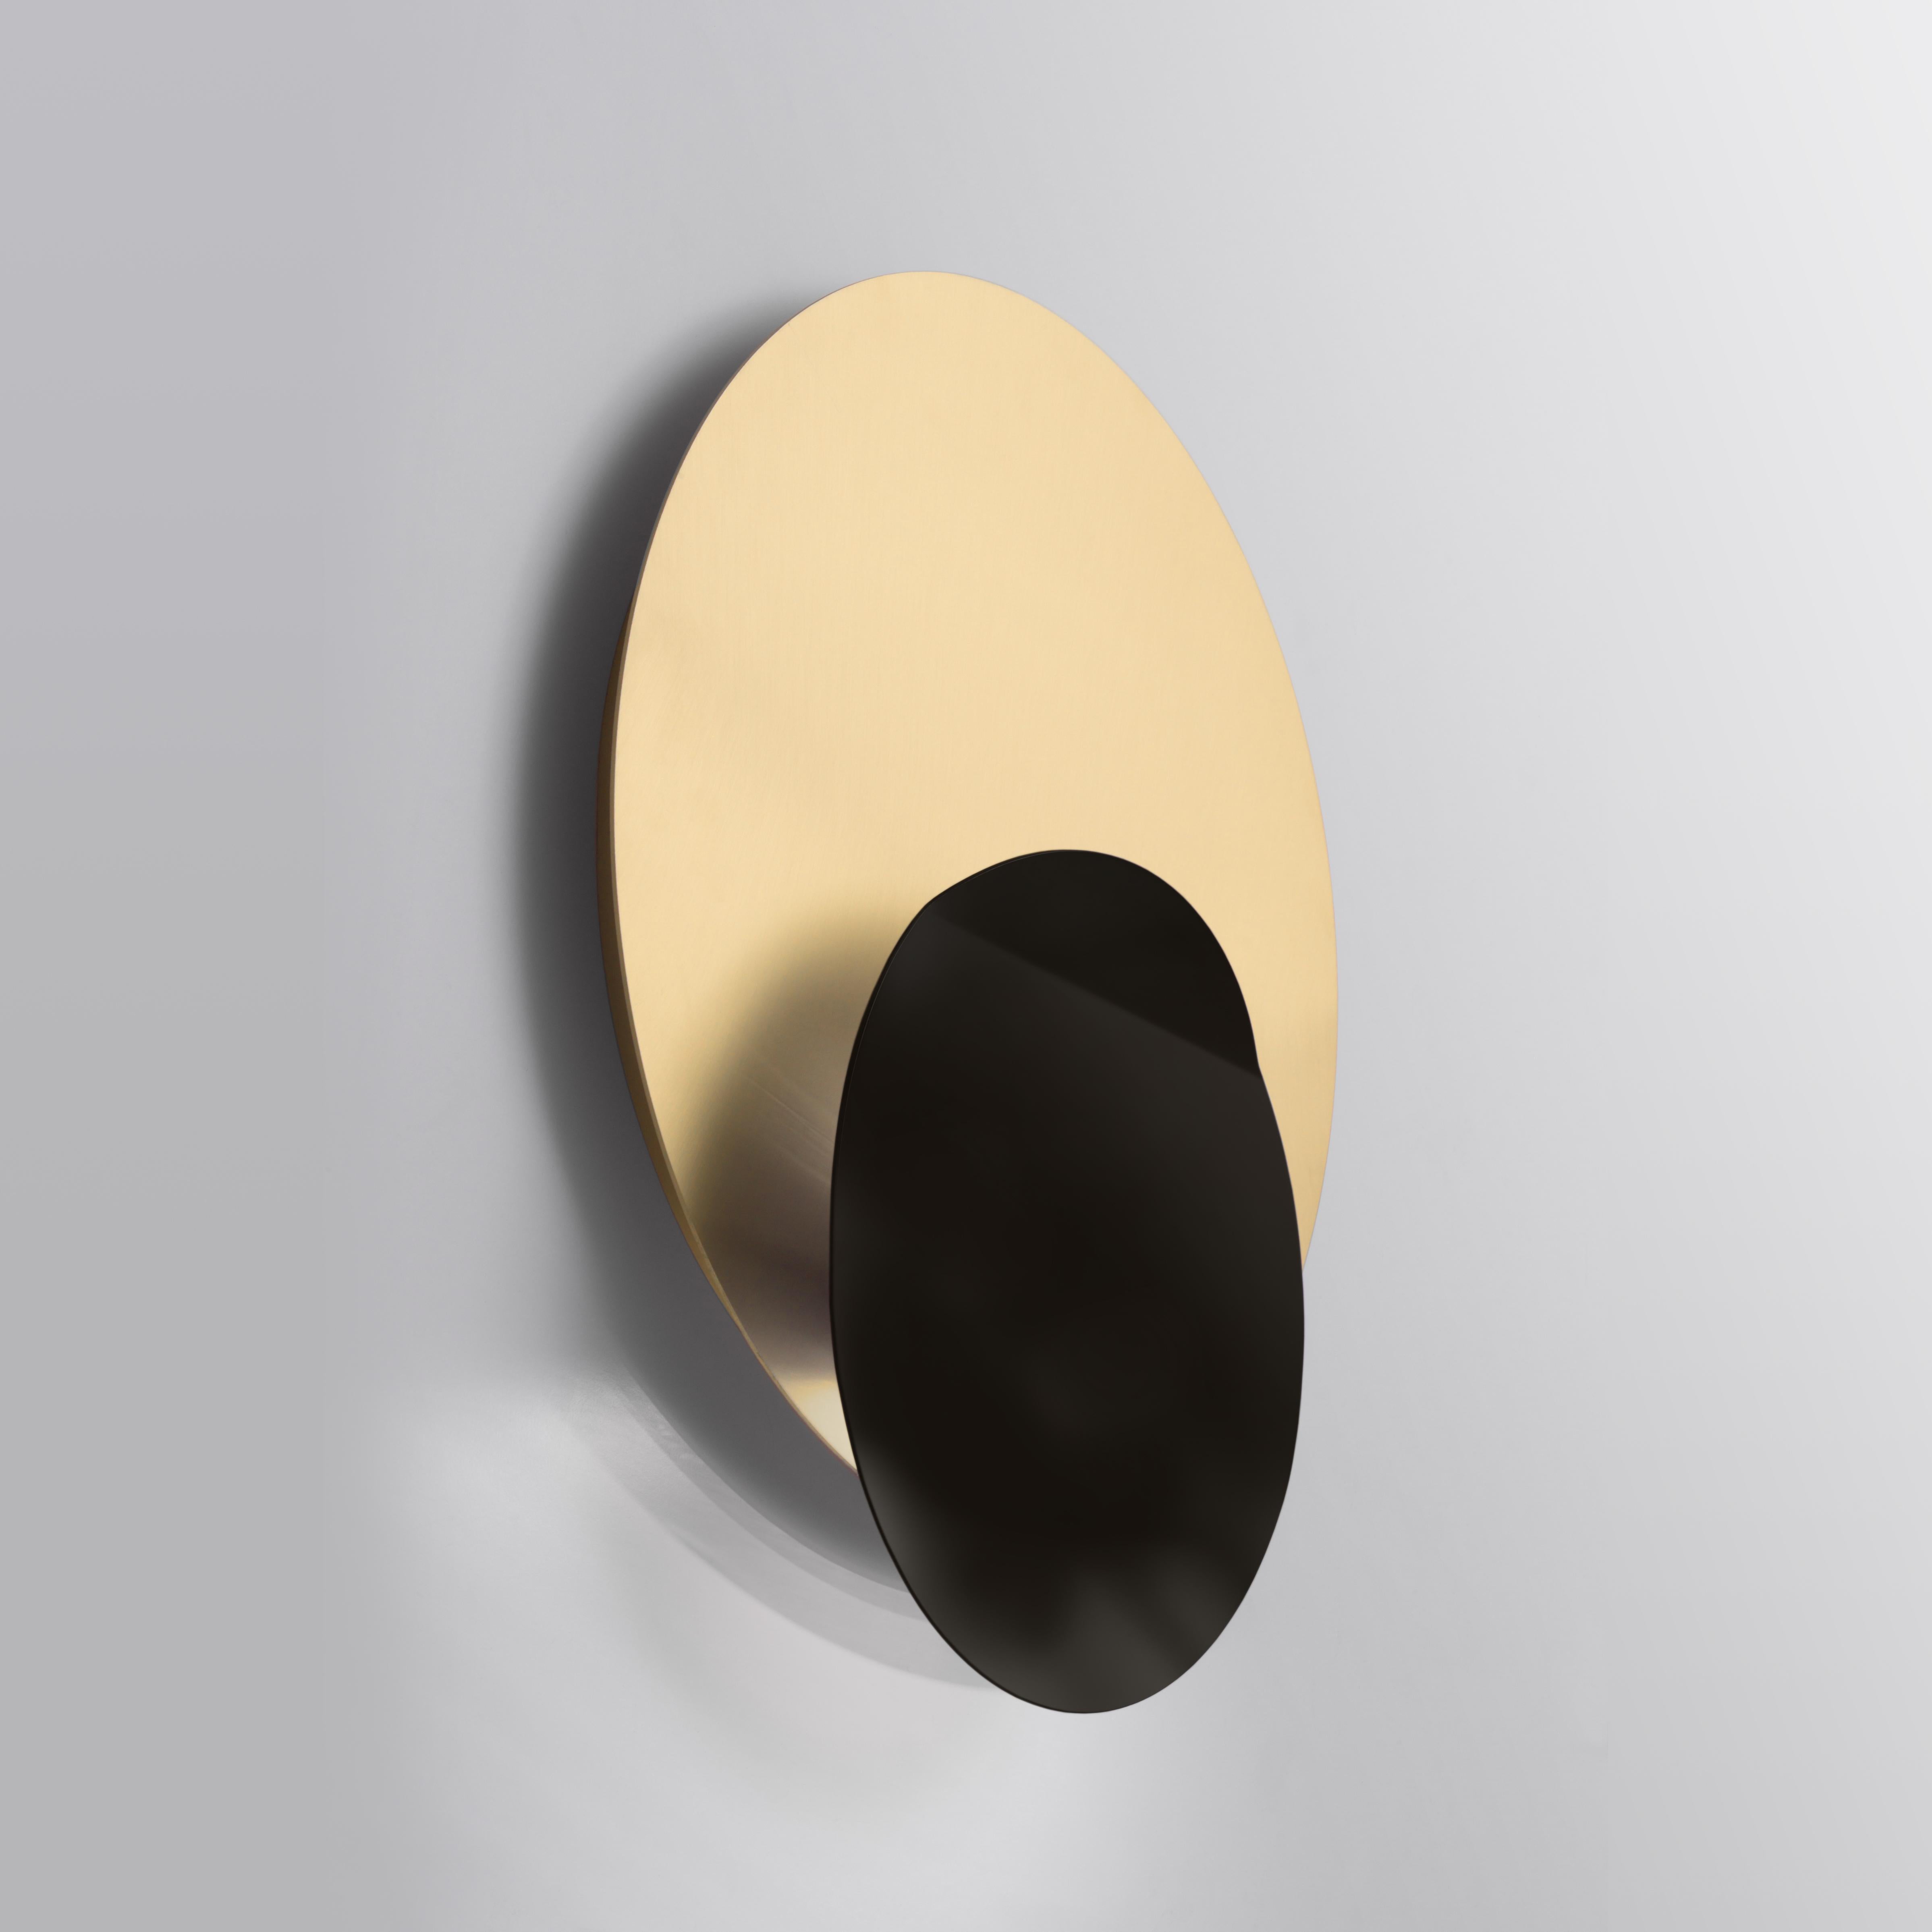 Scur & Ciar wall lamp by Luce Tu
Dimensions: 46 x 57 cm
Materials: Brass 


Luce Tu is the story of two siblings in love with Milan, their hometown.
With the aim of enhancing the historical artisan tradition of the city without losing its past